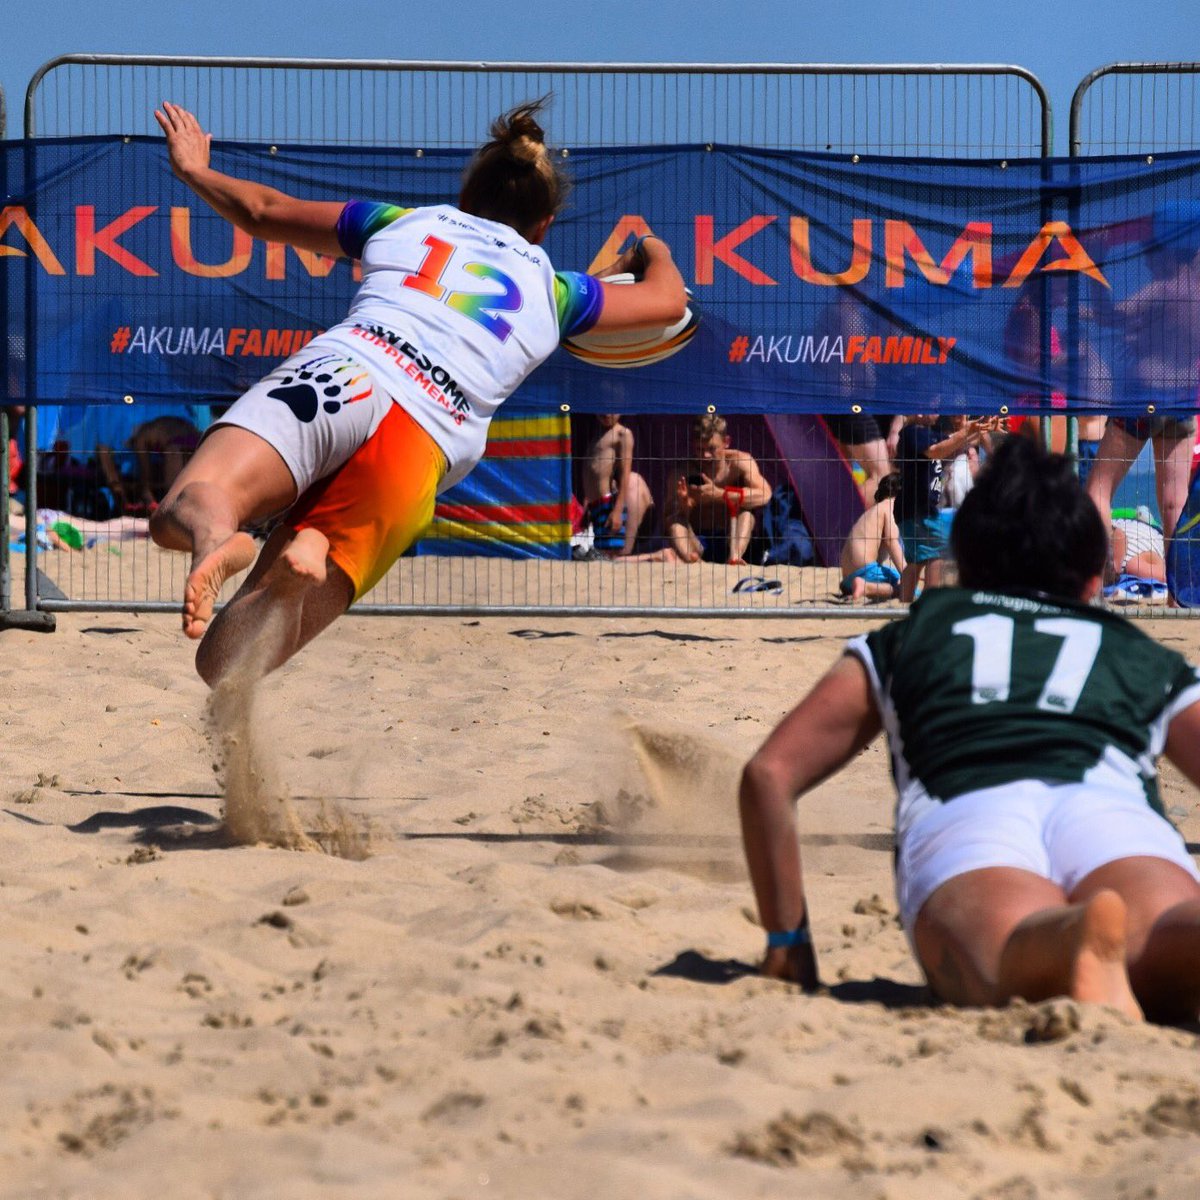 12 days until the best beach rugby tournament in the UK! @BritBeachRugby kicks off on Saturday 23rd June on Bournemouth beach 🇬🇧🏉🌴 Get your spectator tickets 🎟🎟 now; eventbrite.co.uk/e/british-beac… #BritishBeachRugby2018 #LetsGetSandy #ShowTheFlair